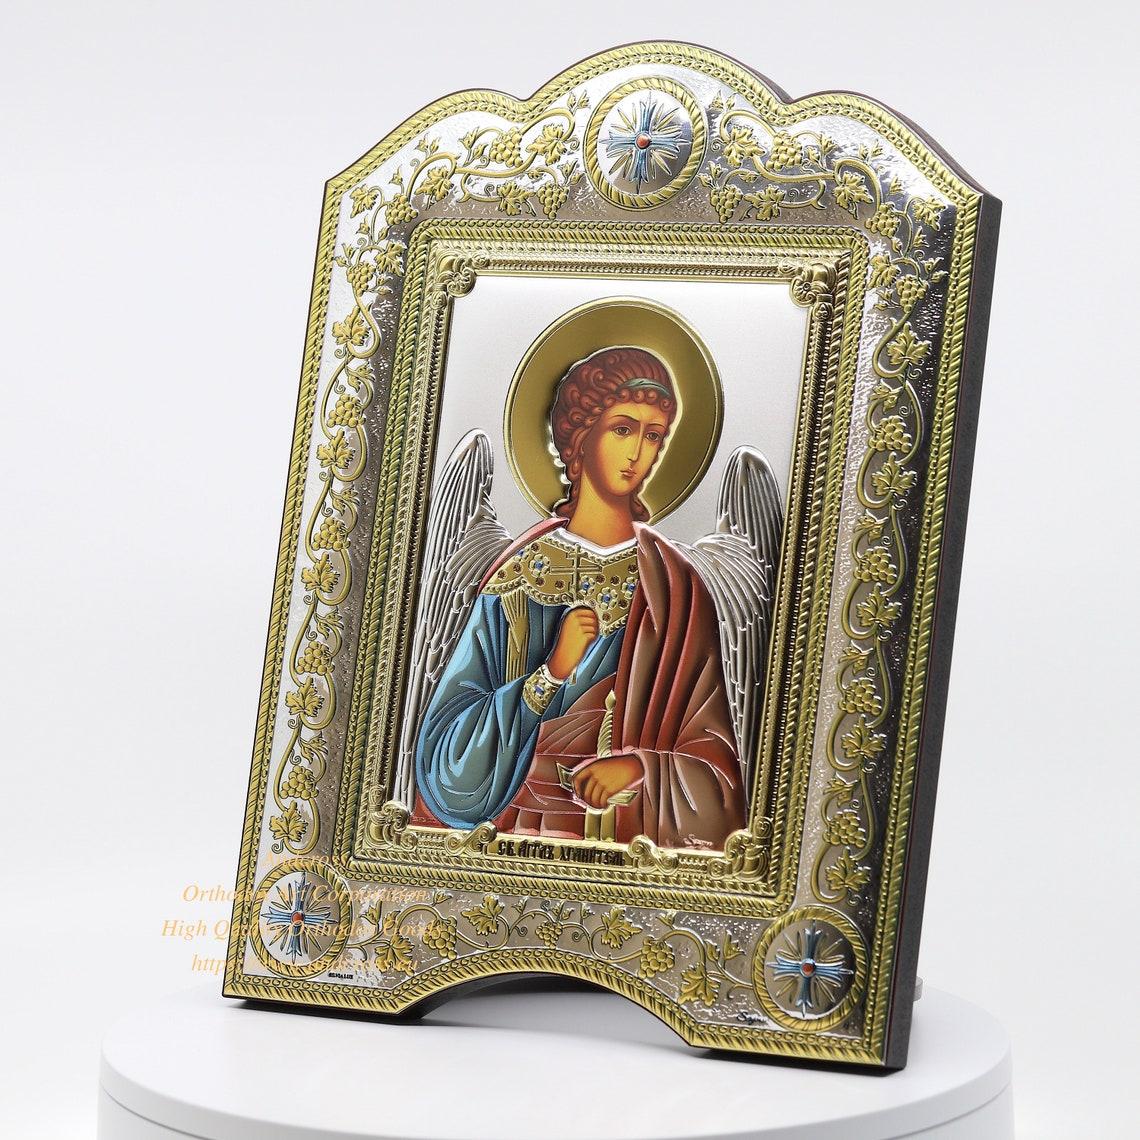 The Great Miraculous Christian Orthodox Silver Icon – The Guardian Angel. 21cmx28cm Gold and silver version. Colored Version. B104|The Great Miraculous Christian Orthodox Silver Icon – The Guardian Angel. 21cmx28cm Gold and silver version. Colored Version. B104|The Great Miraculous Christian Orthodox Silver Icon – The Guardian Angel. 21cmx28cm Gold and silver version. Colored Version. B104|The Great Miraculous Christian Orthodox Silver Icon – The Guardian Angel. 21cmx28cm Gold and silver version. Colored Version. B104|The Great Miraculous Christian Orthodox Silver Icon – The Guardian Angel. 21cmx28cm Gold and silver version. Colored Version. B104